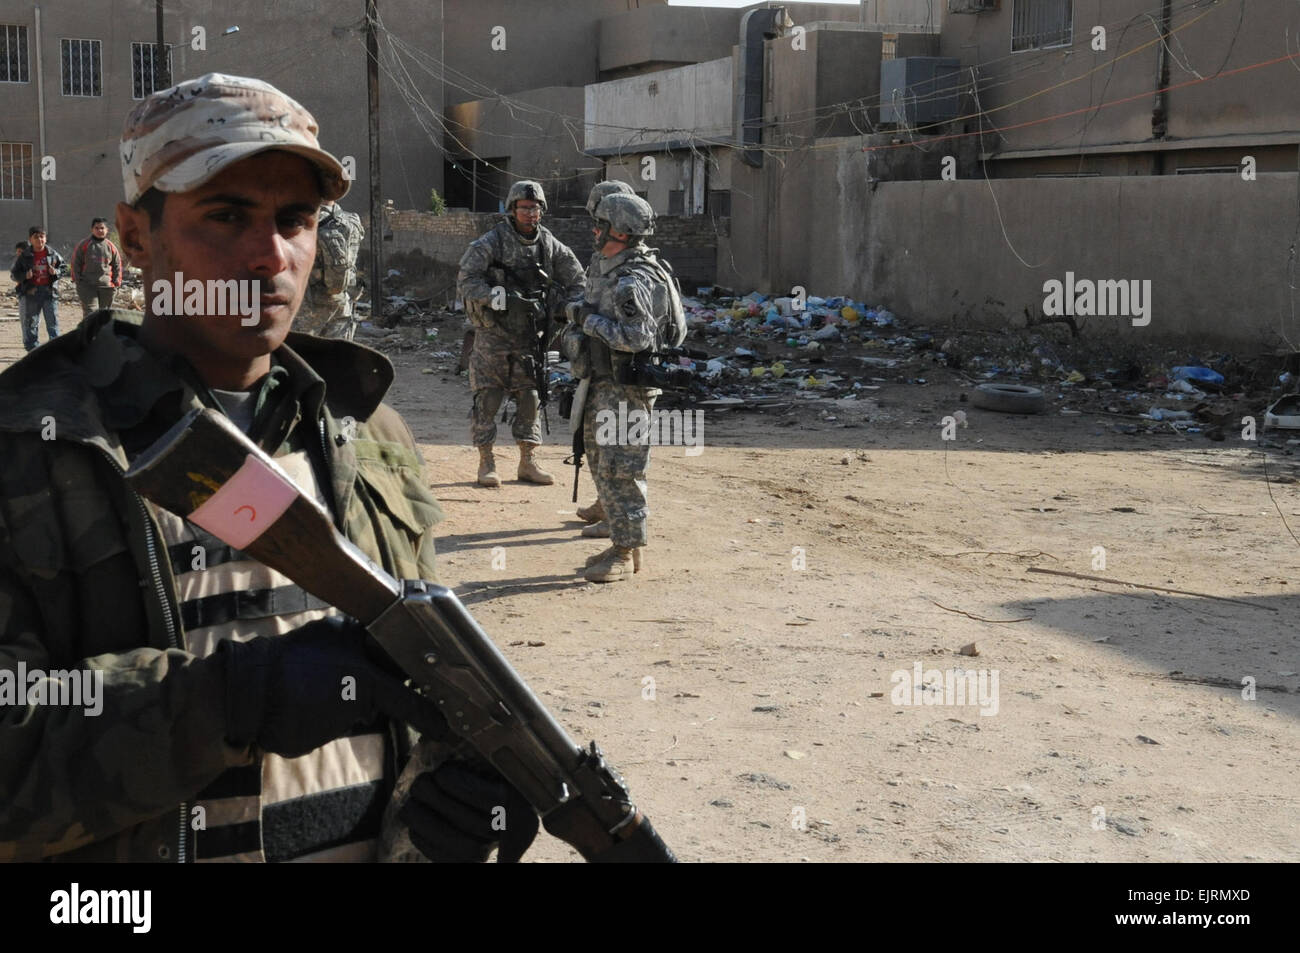 An Iraqi soldier provides security during a joint patrol with U.S. Soldiers of B Troop, 5th Cavalry, 73rd Regiment, 3rd Brigade Combat Team, 82nd Airborne Division, in Muhallah 710, Muthana Zayuna, eastern Baghdad, Iraq, on Jan. 2, 2009. Stock Photo